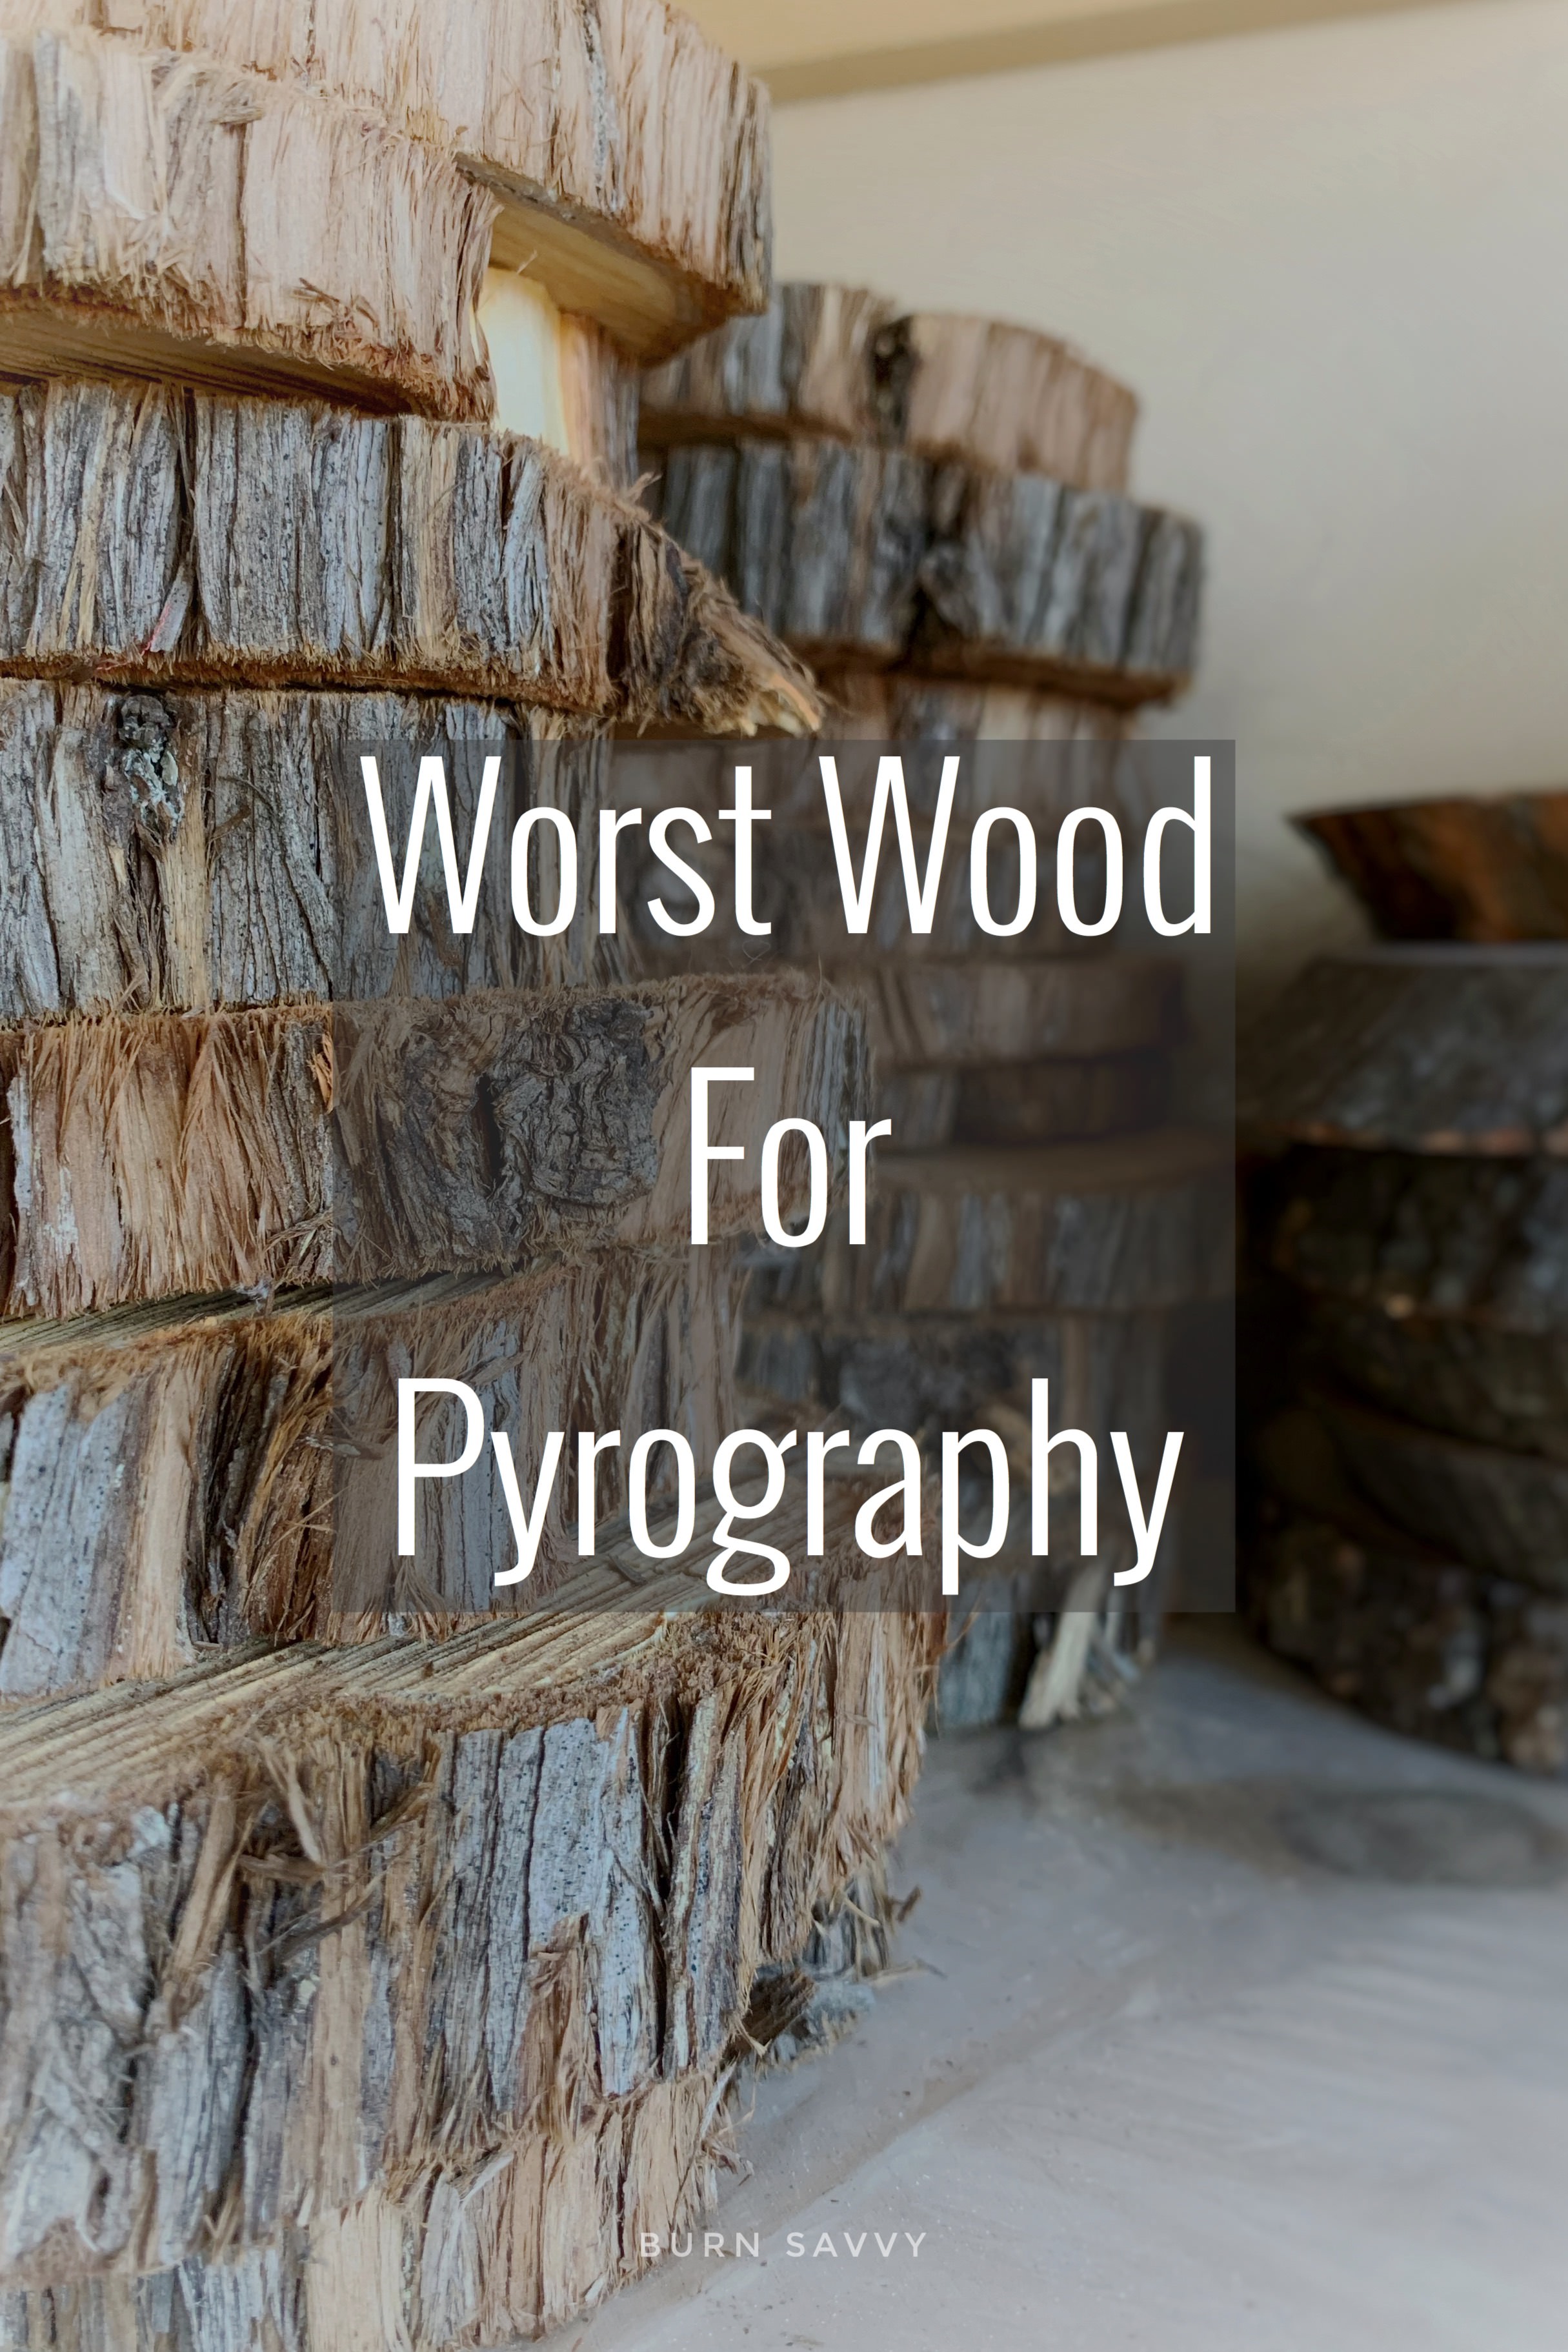 Worst Wood for Pyrography - Your Do NOT Burn List